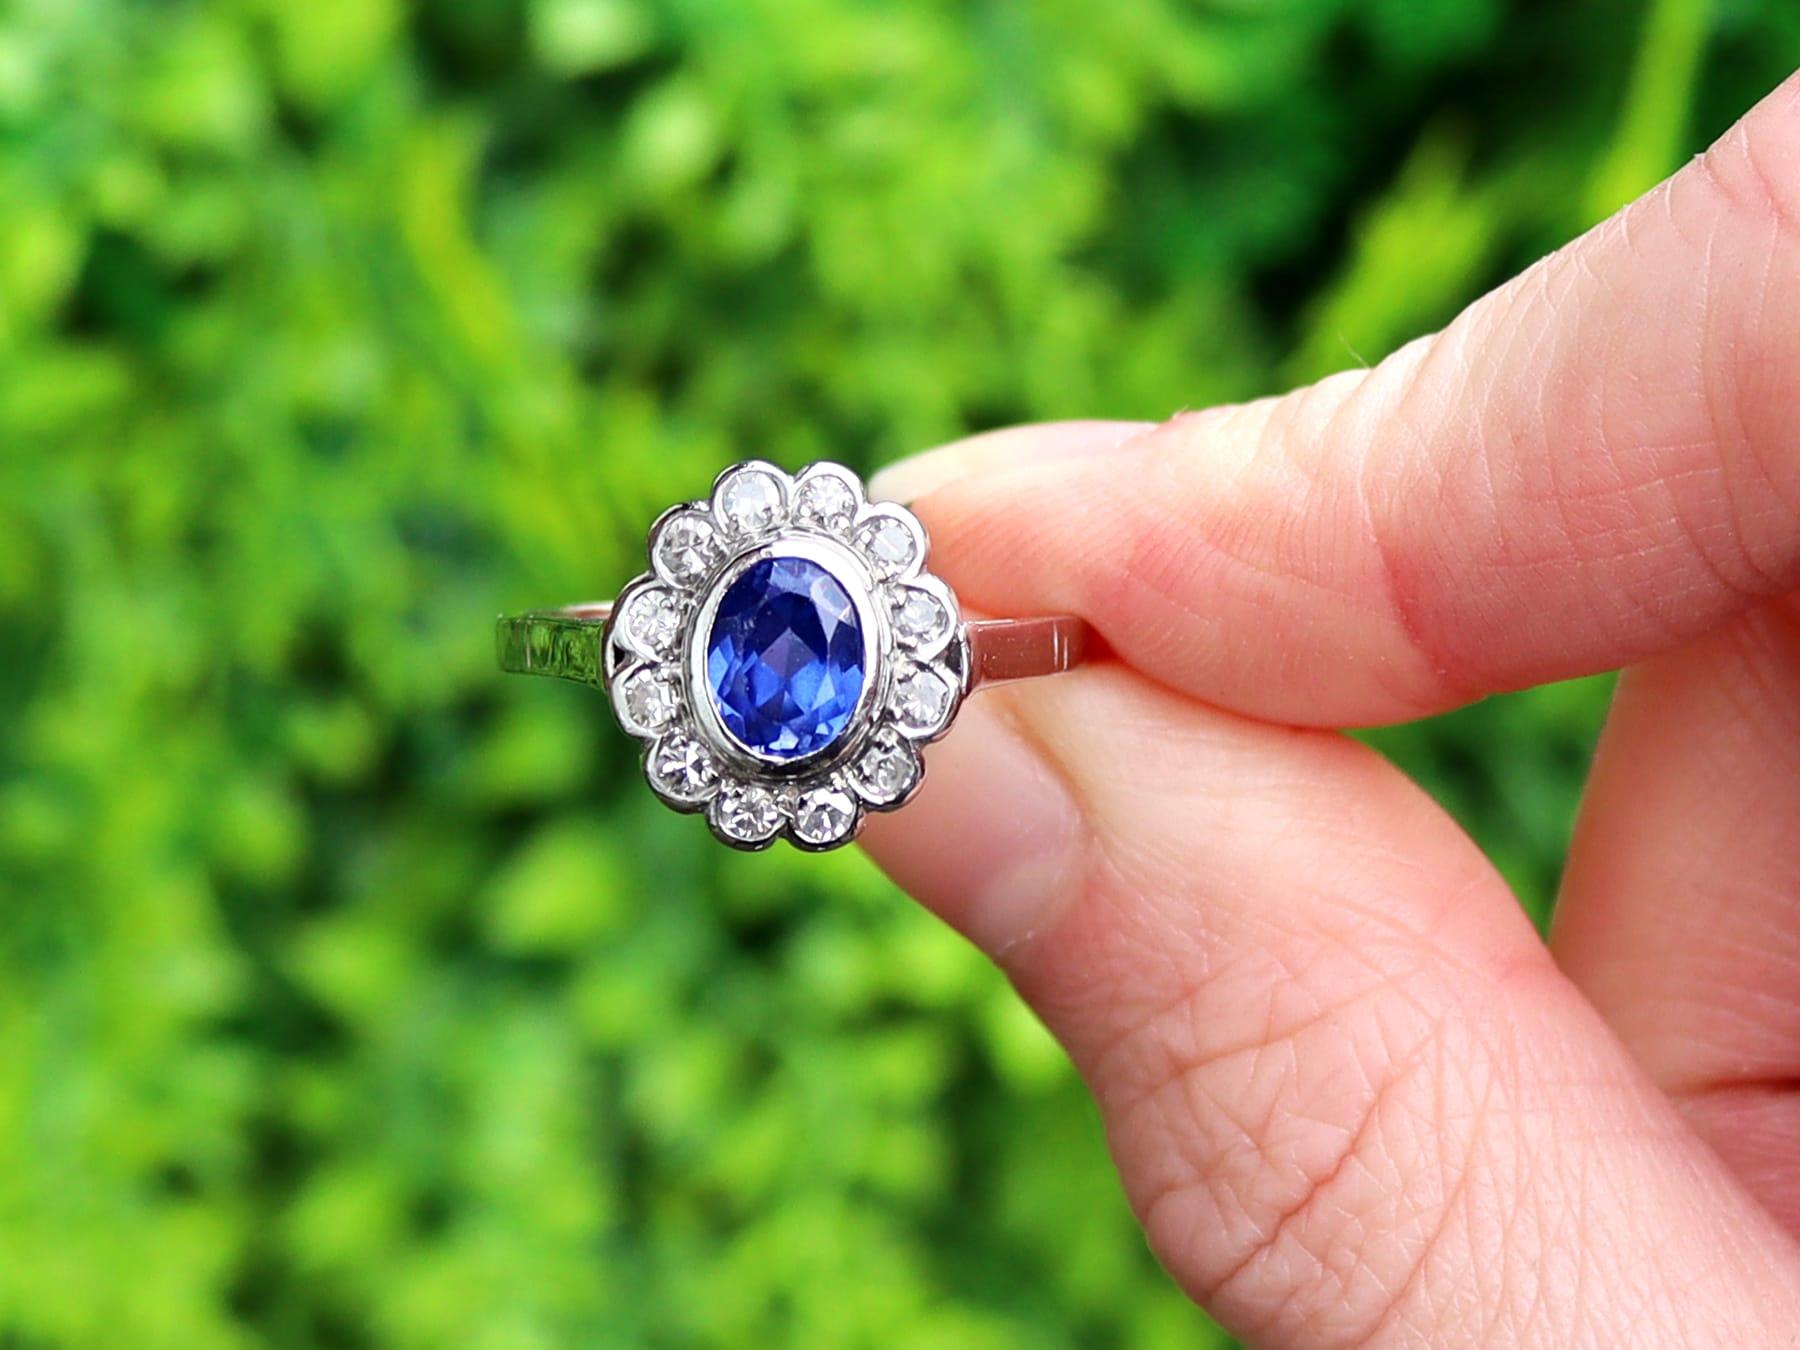 A fine and impressive 1.12 carat sapphire and 0.48 carat diamond, platinum cocktail ring; part of our antique estate jewelry collections.

This stunning, fine and impressive antique oval cut blue sapphire ring has been crafted in platinum.

The oval